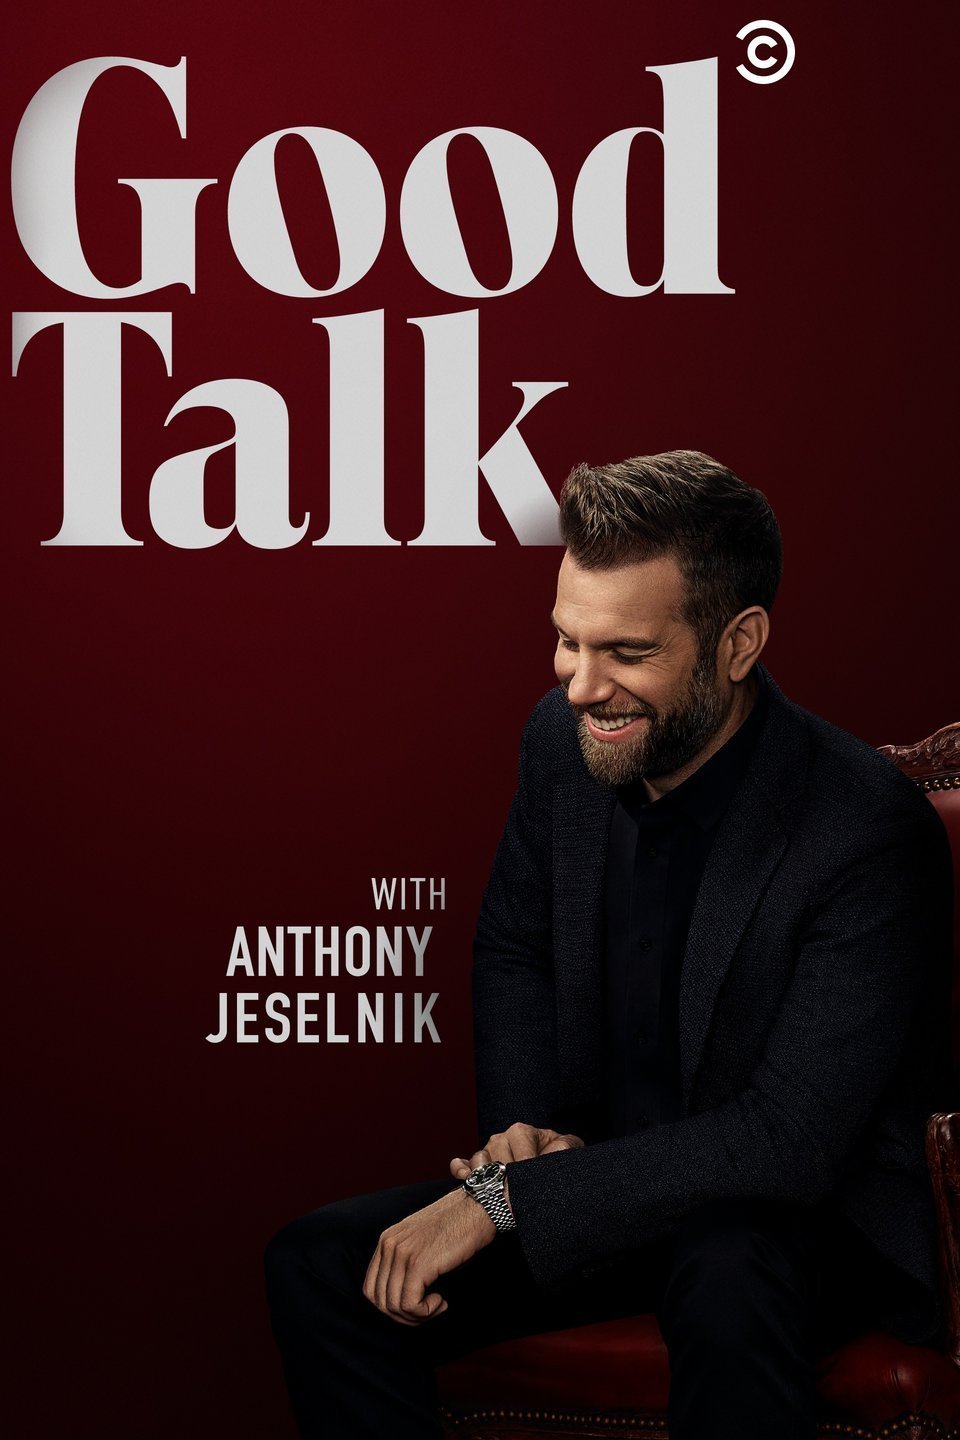 Poster of the movie Good Talk with Anthony Jeselnik